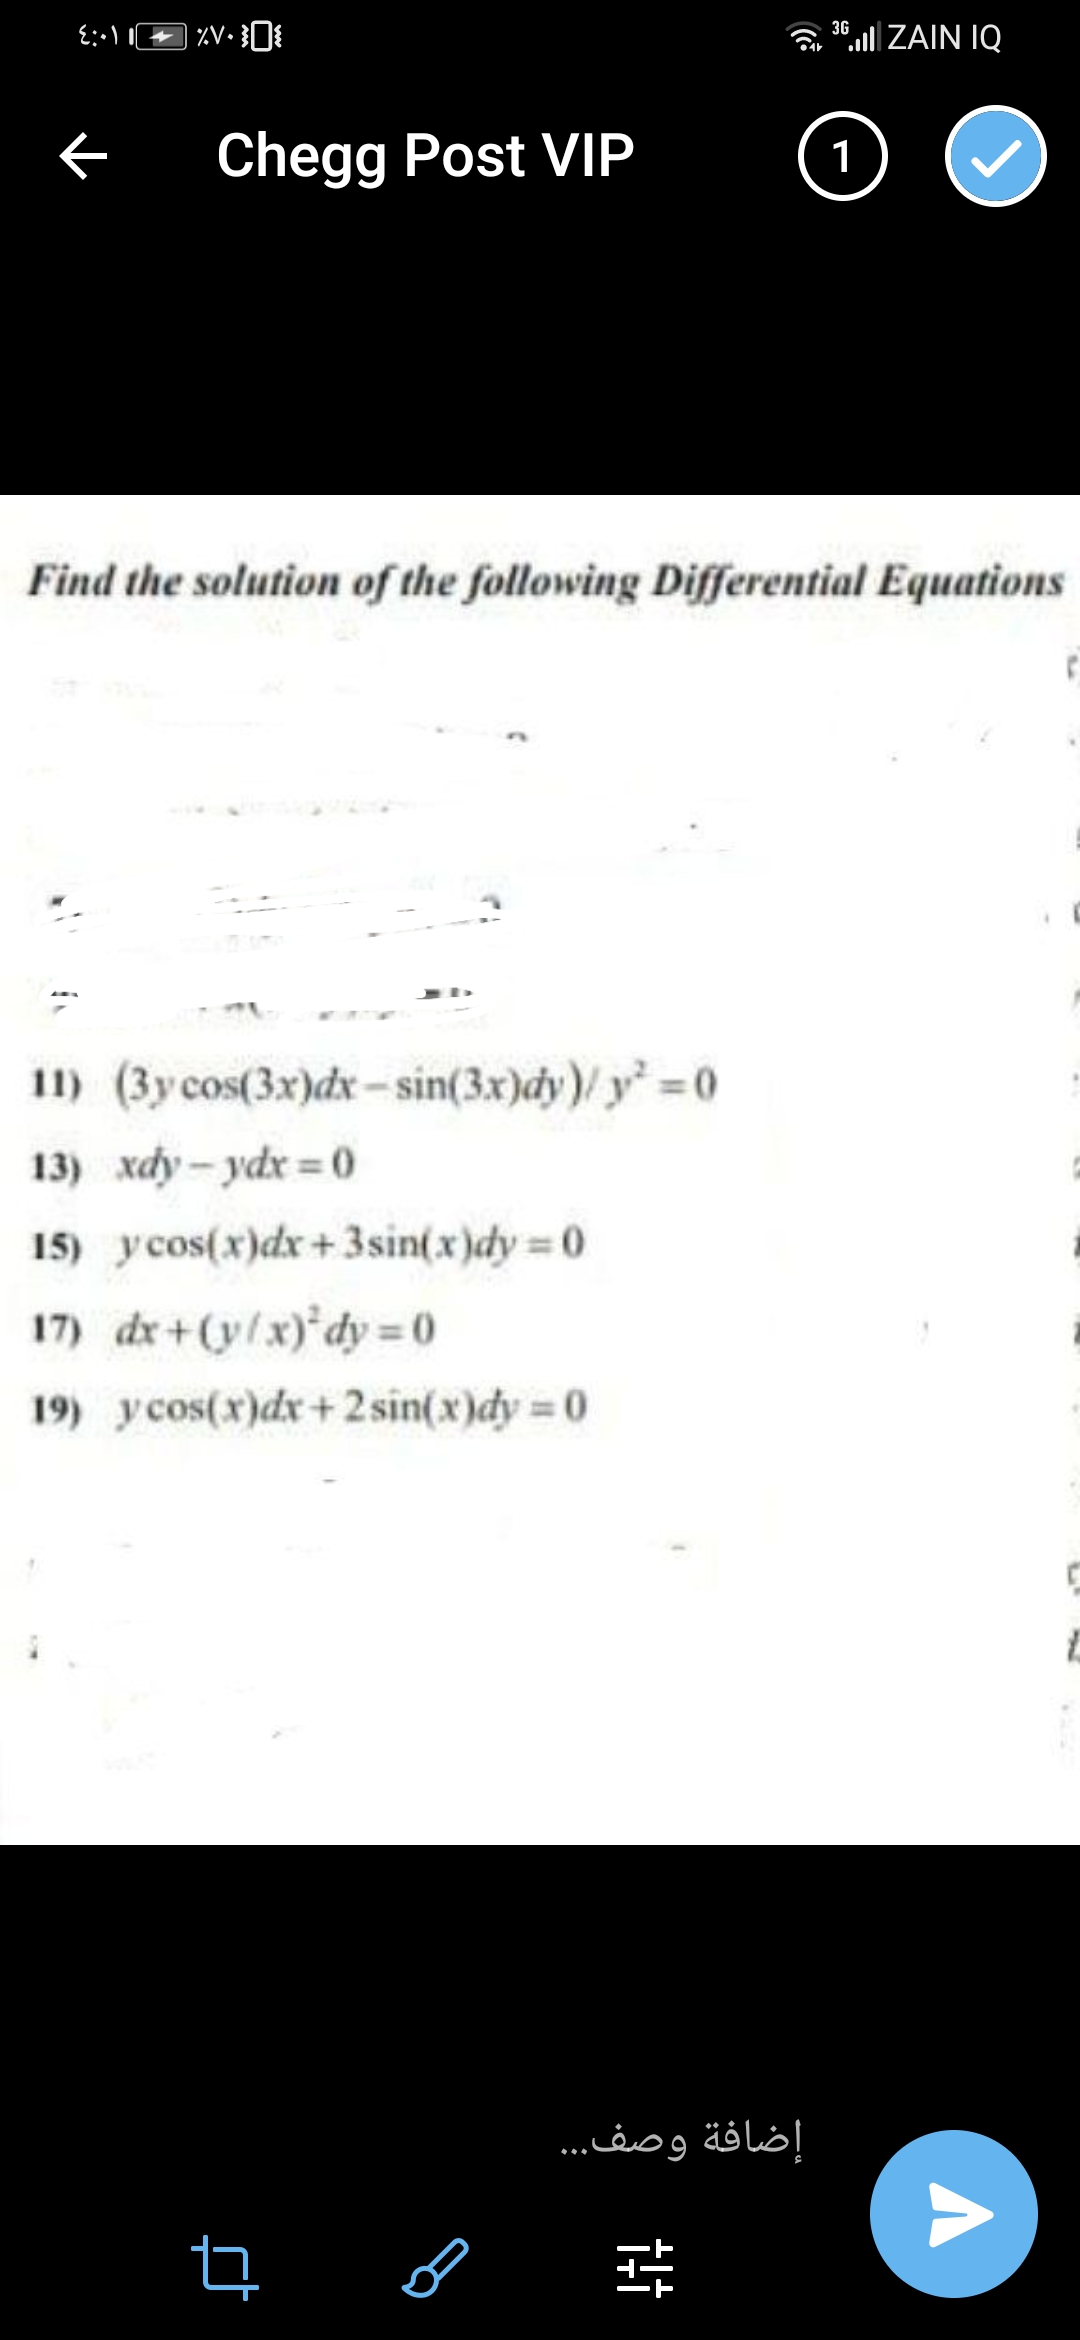 3G
“. ZAIN IQ
Chegg Post VIP
1
Find the solution of the following Differential Equations
11) (3y cos(3x)dx - sin(3x)dy)/ y =0
13) xdy - ydx = 0
15) ycos(x)dx+ 3sin(x)dy = 0
17) dr+(y/x)'dy 0
19) y cos(x)dx+2 sin(x)dy = 0
إضافة وصف..
